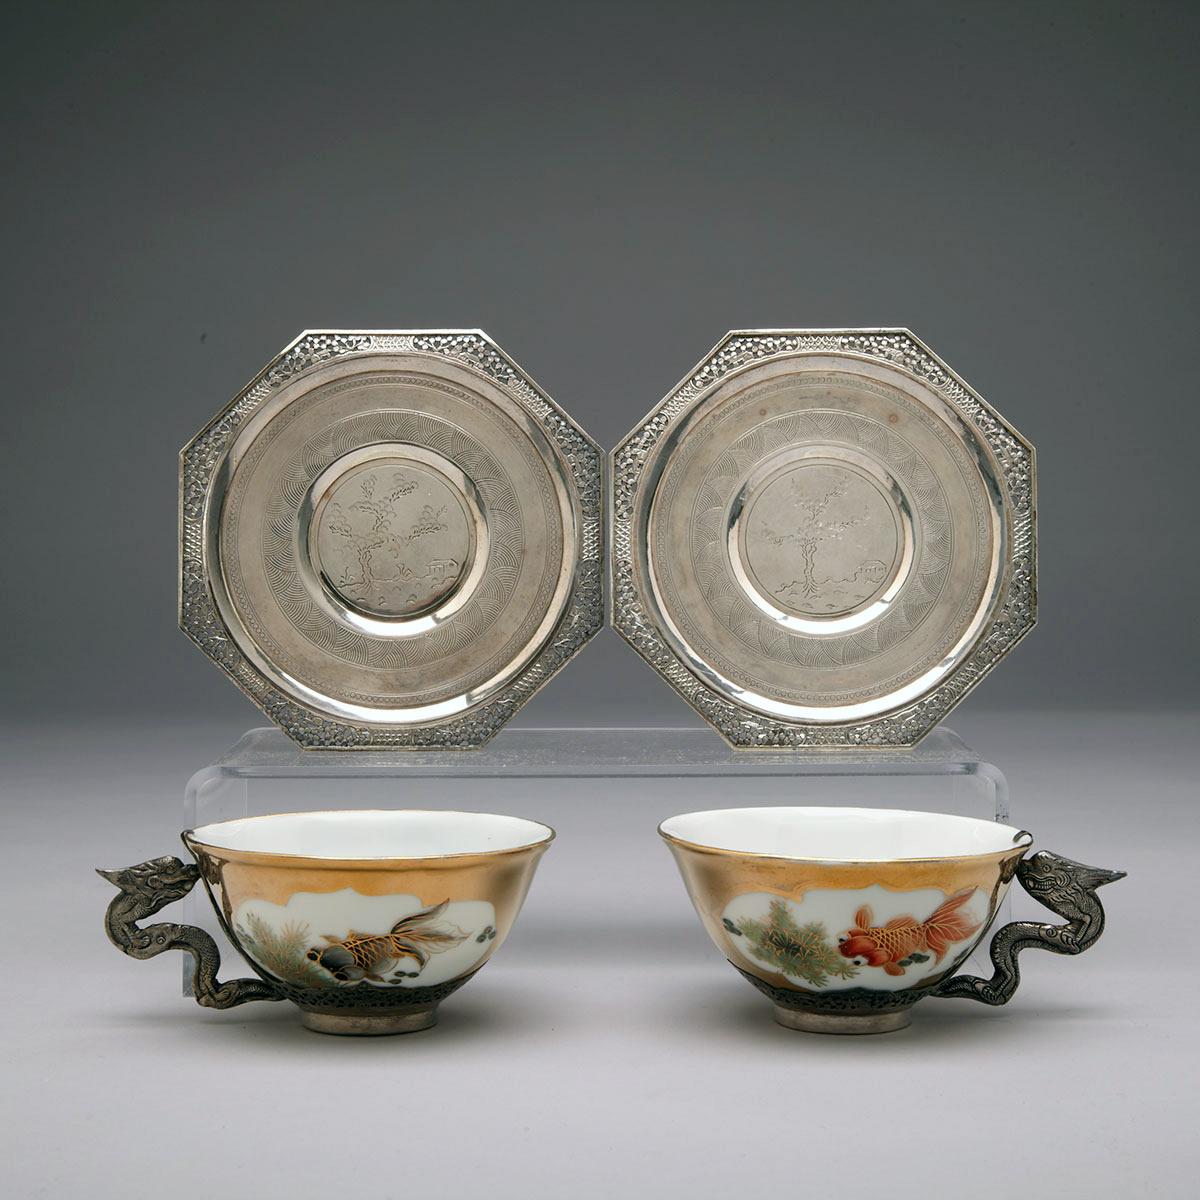 Pair of Silver Mounted Satsuma Teacups and Saucers 